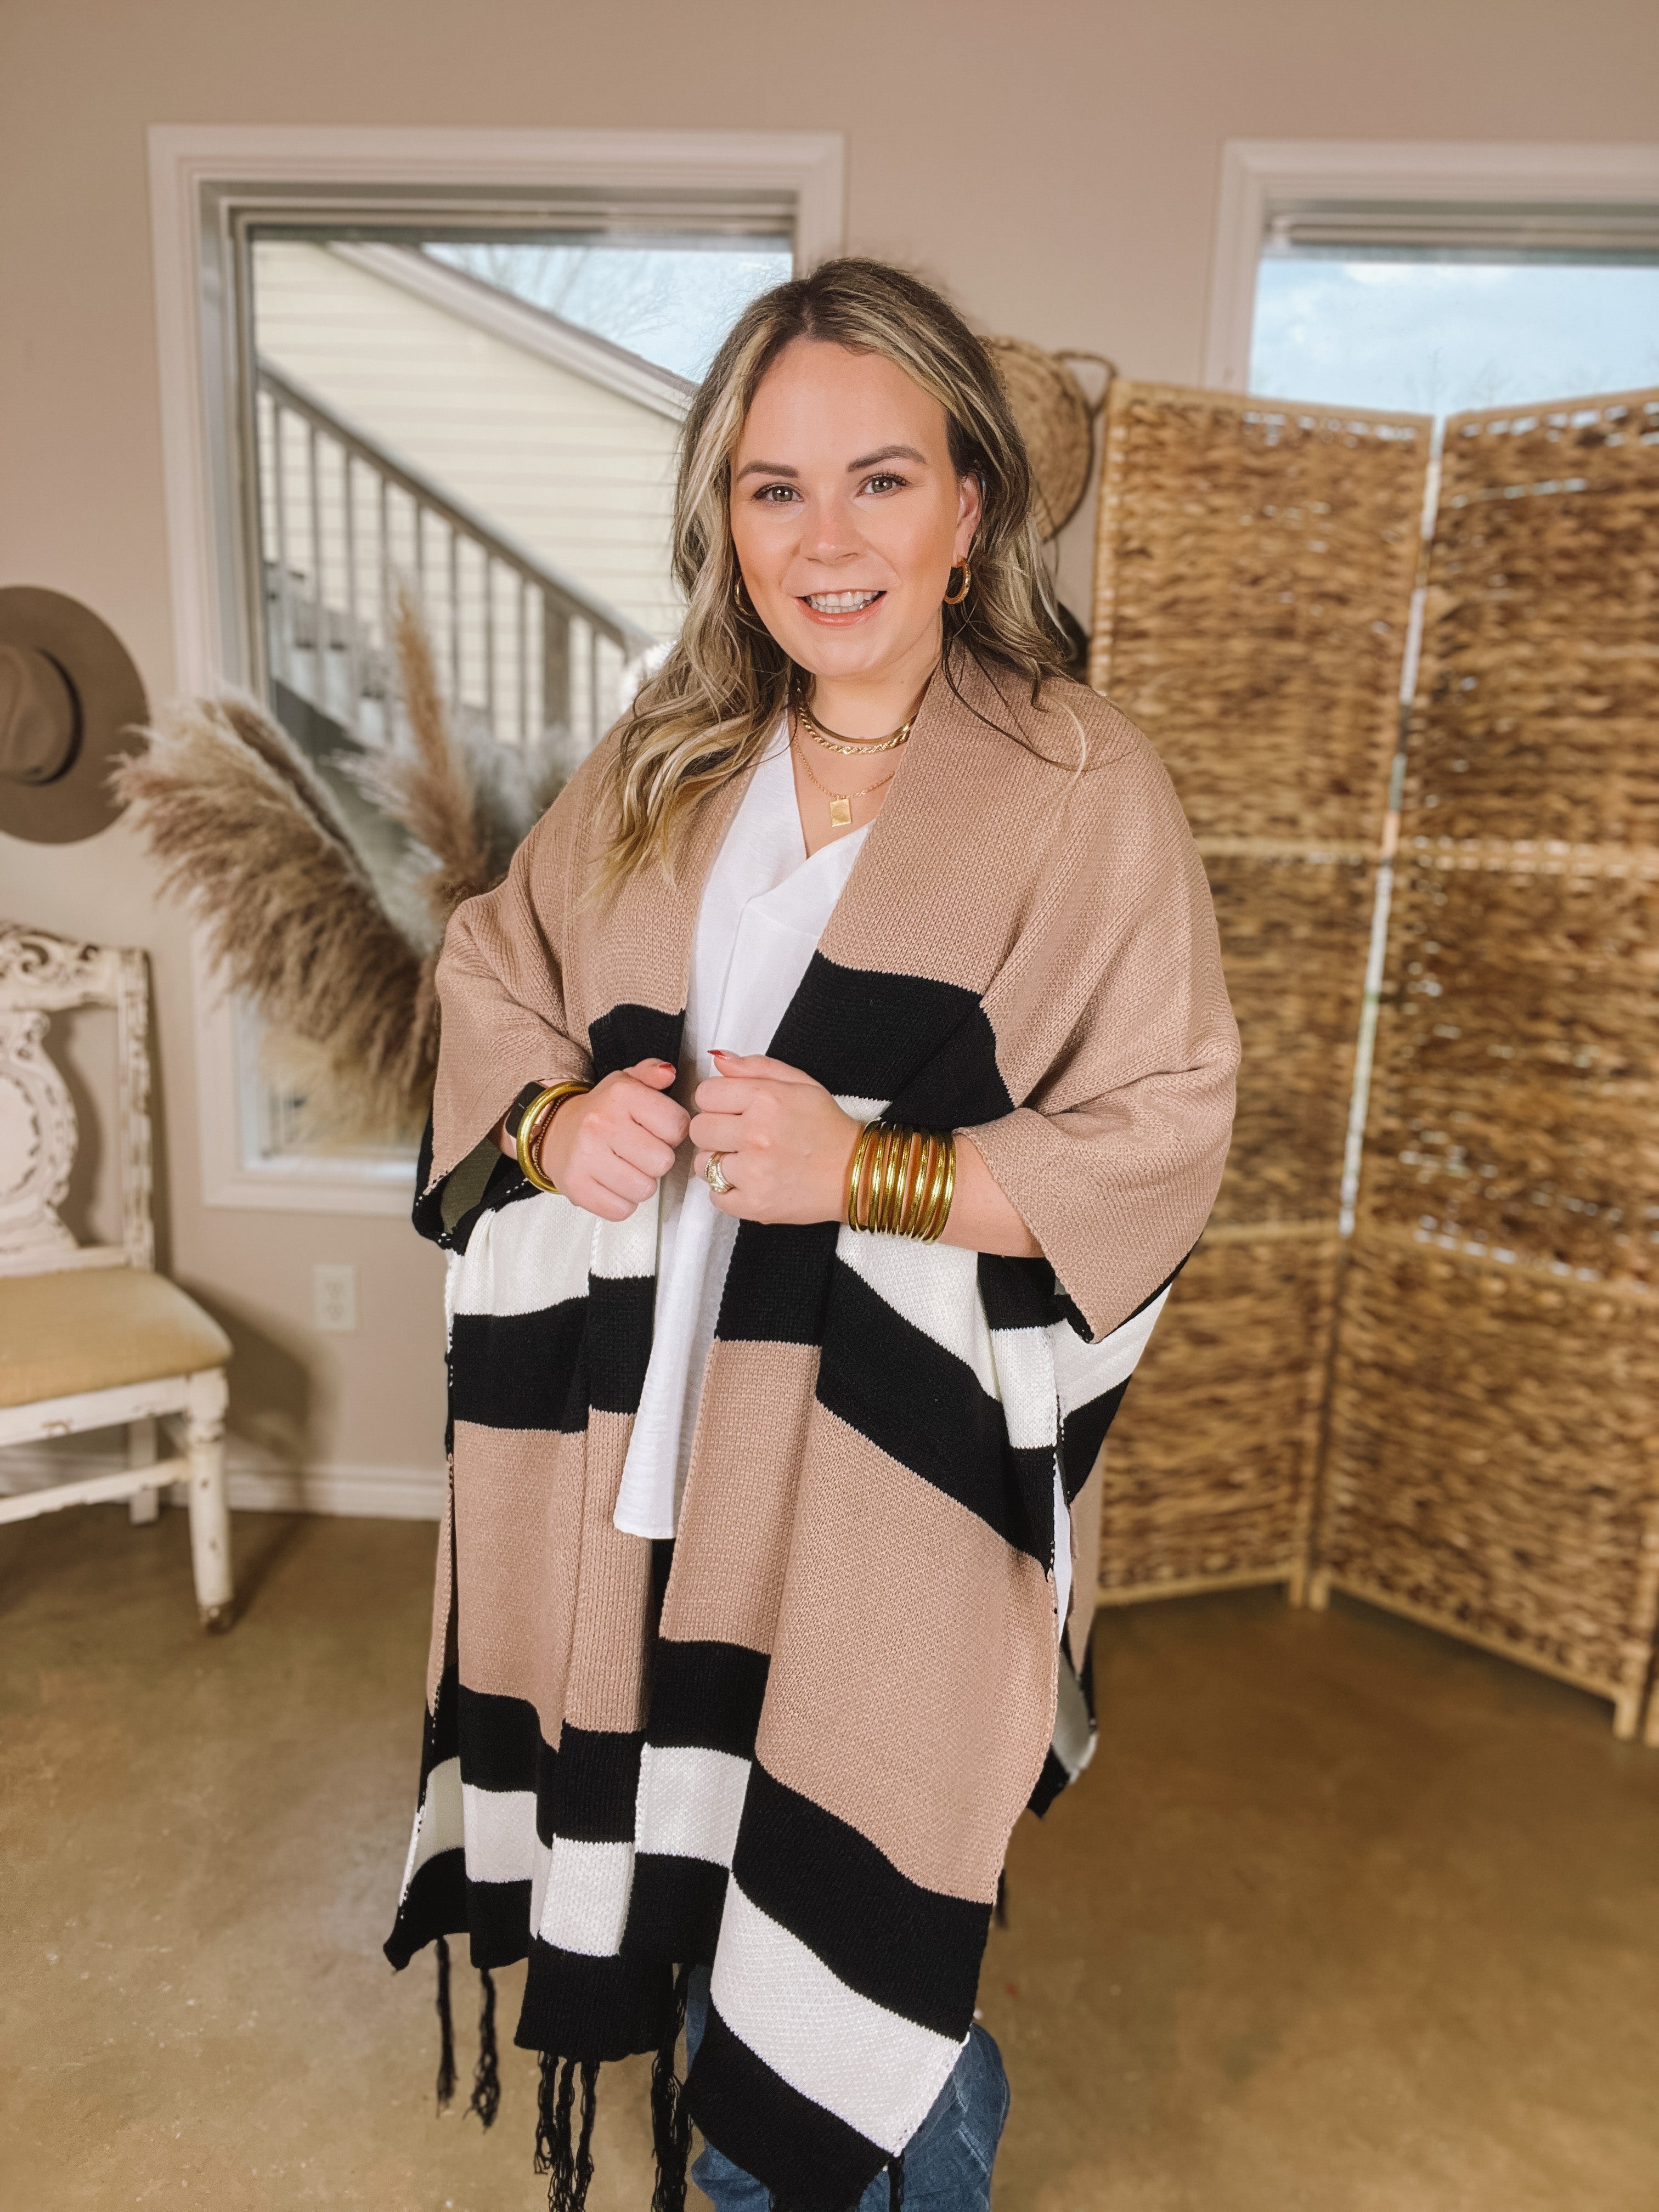 Warmest Wishes Striped Poncho Cardigan with Tassel Fringe in Mocha, Ivory, and Black - Giddy Up Glamour Boutique